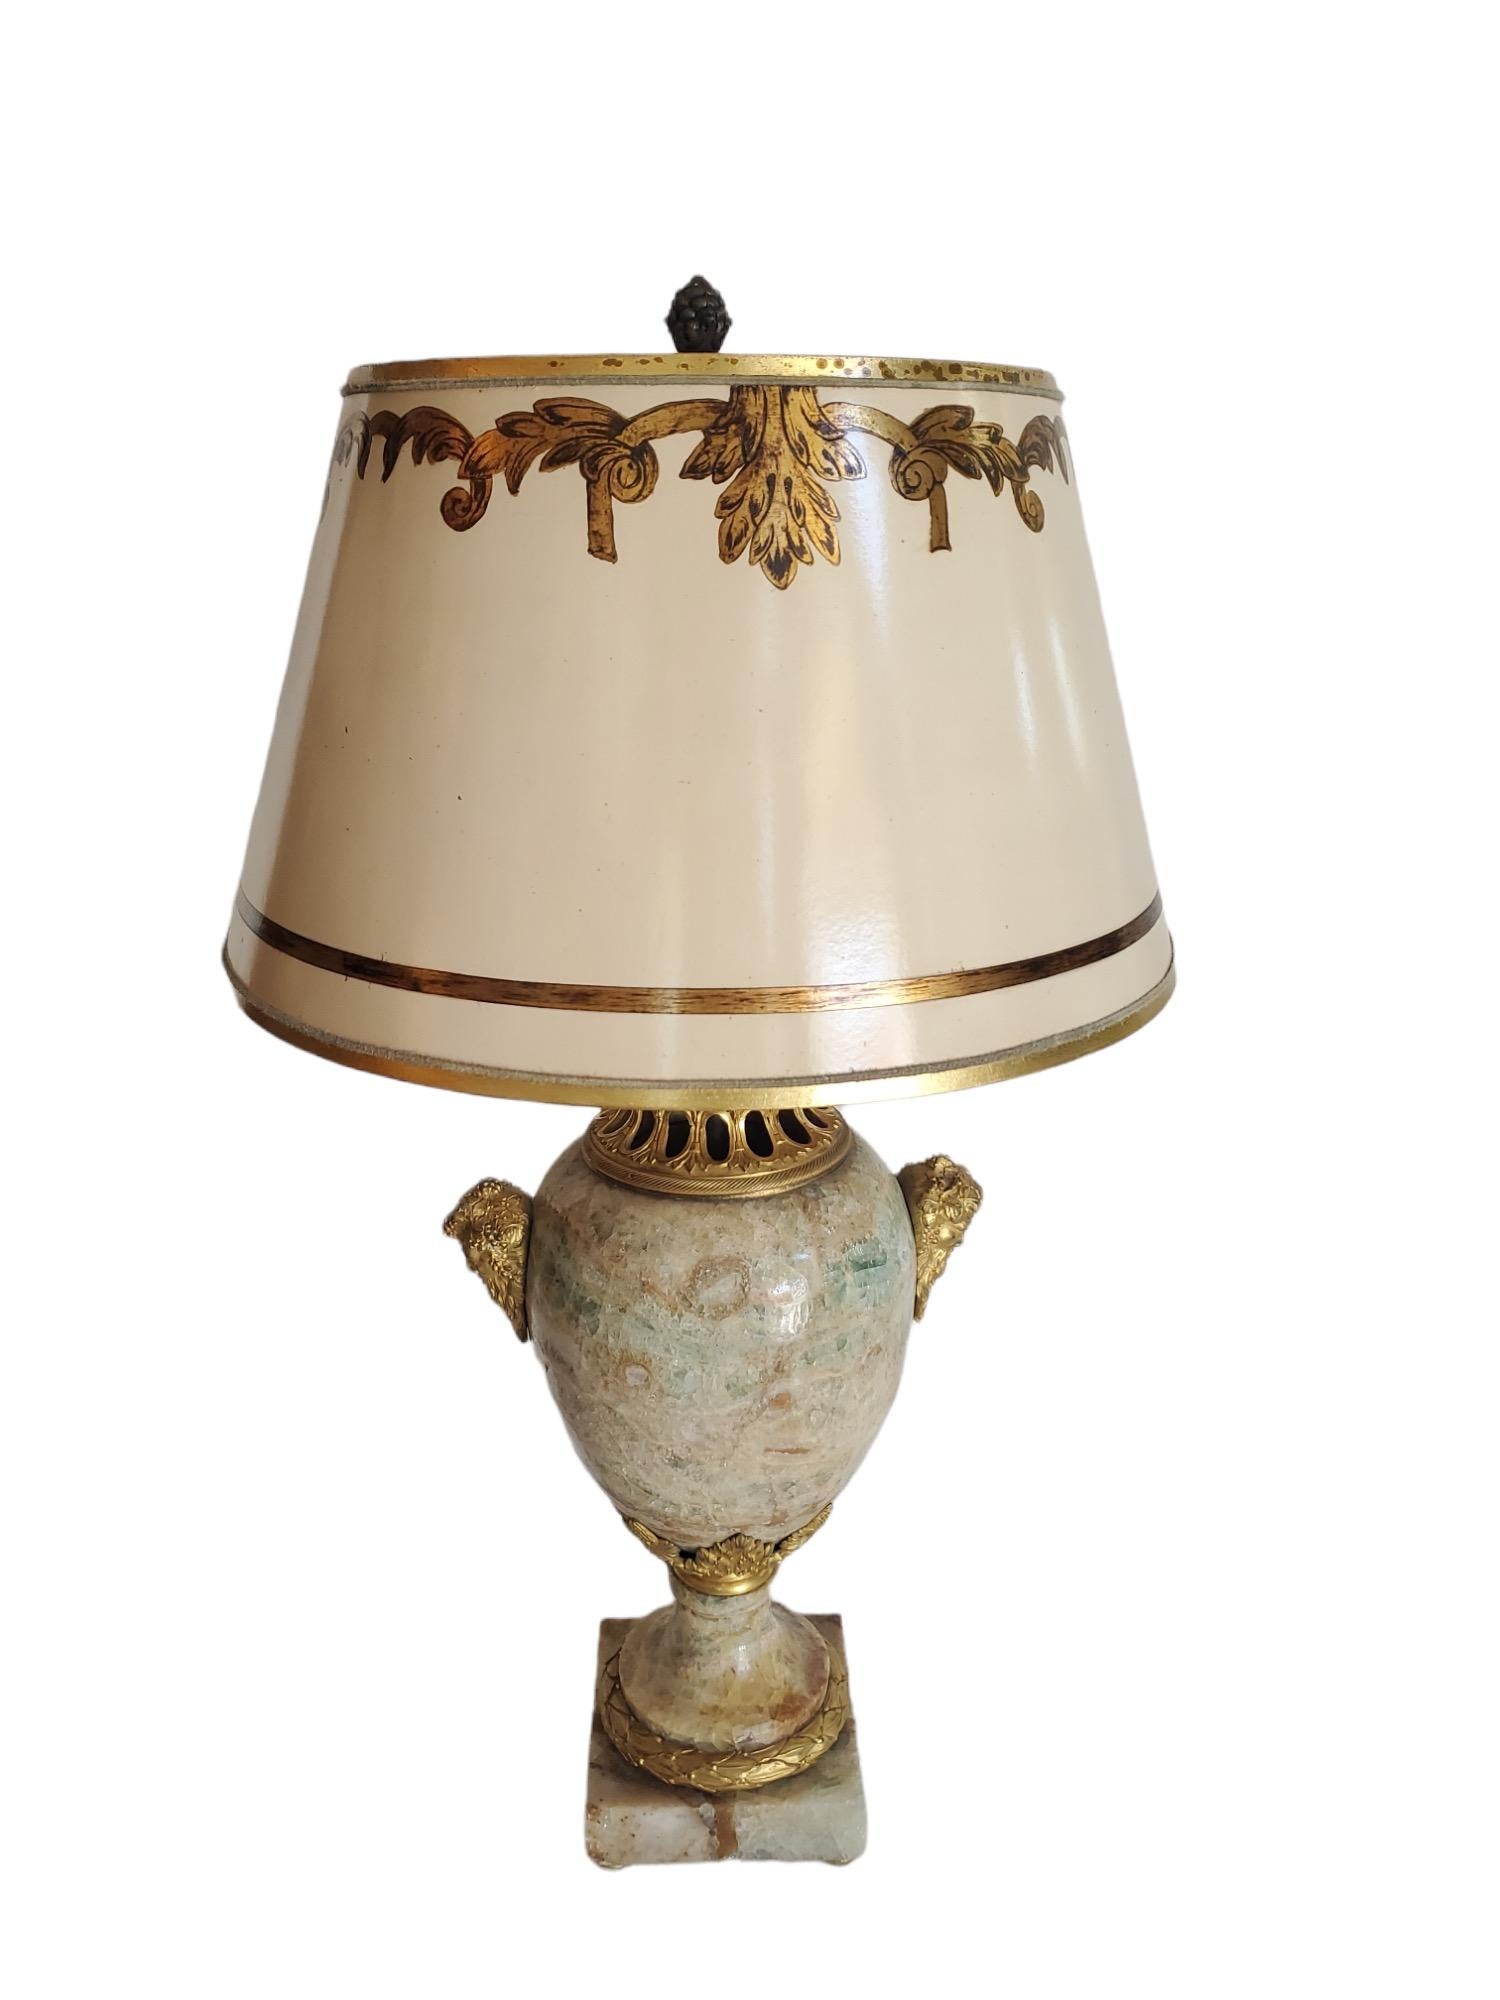 The marble is possibly Blue John stone. Lamp was originally purchased at Sotheby's in New York City. The overall body width is 9